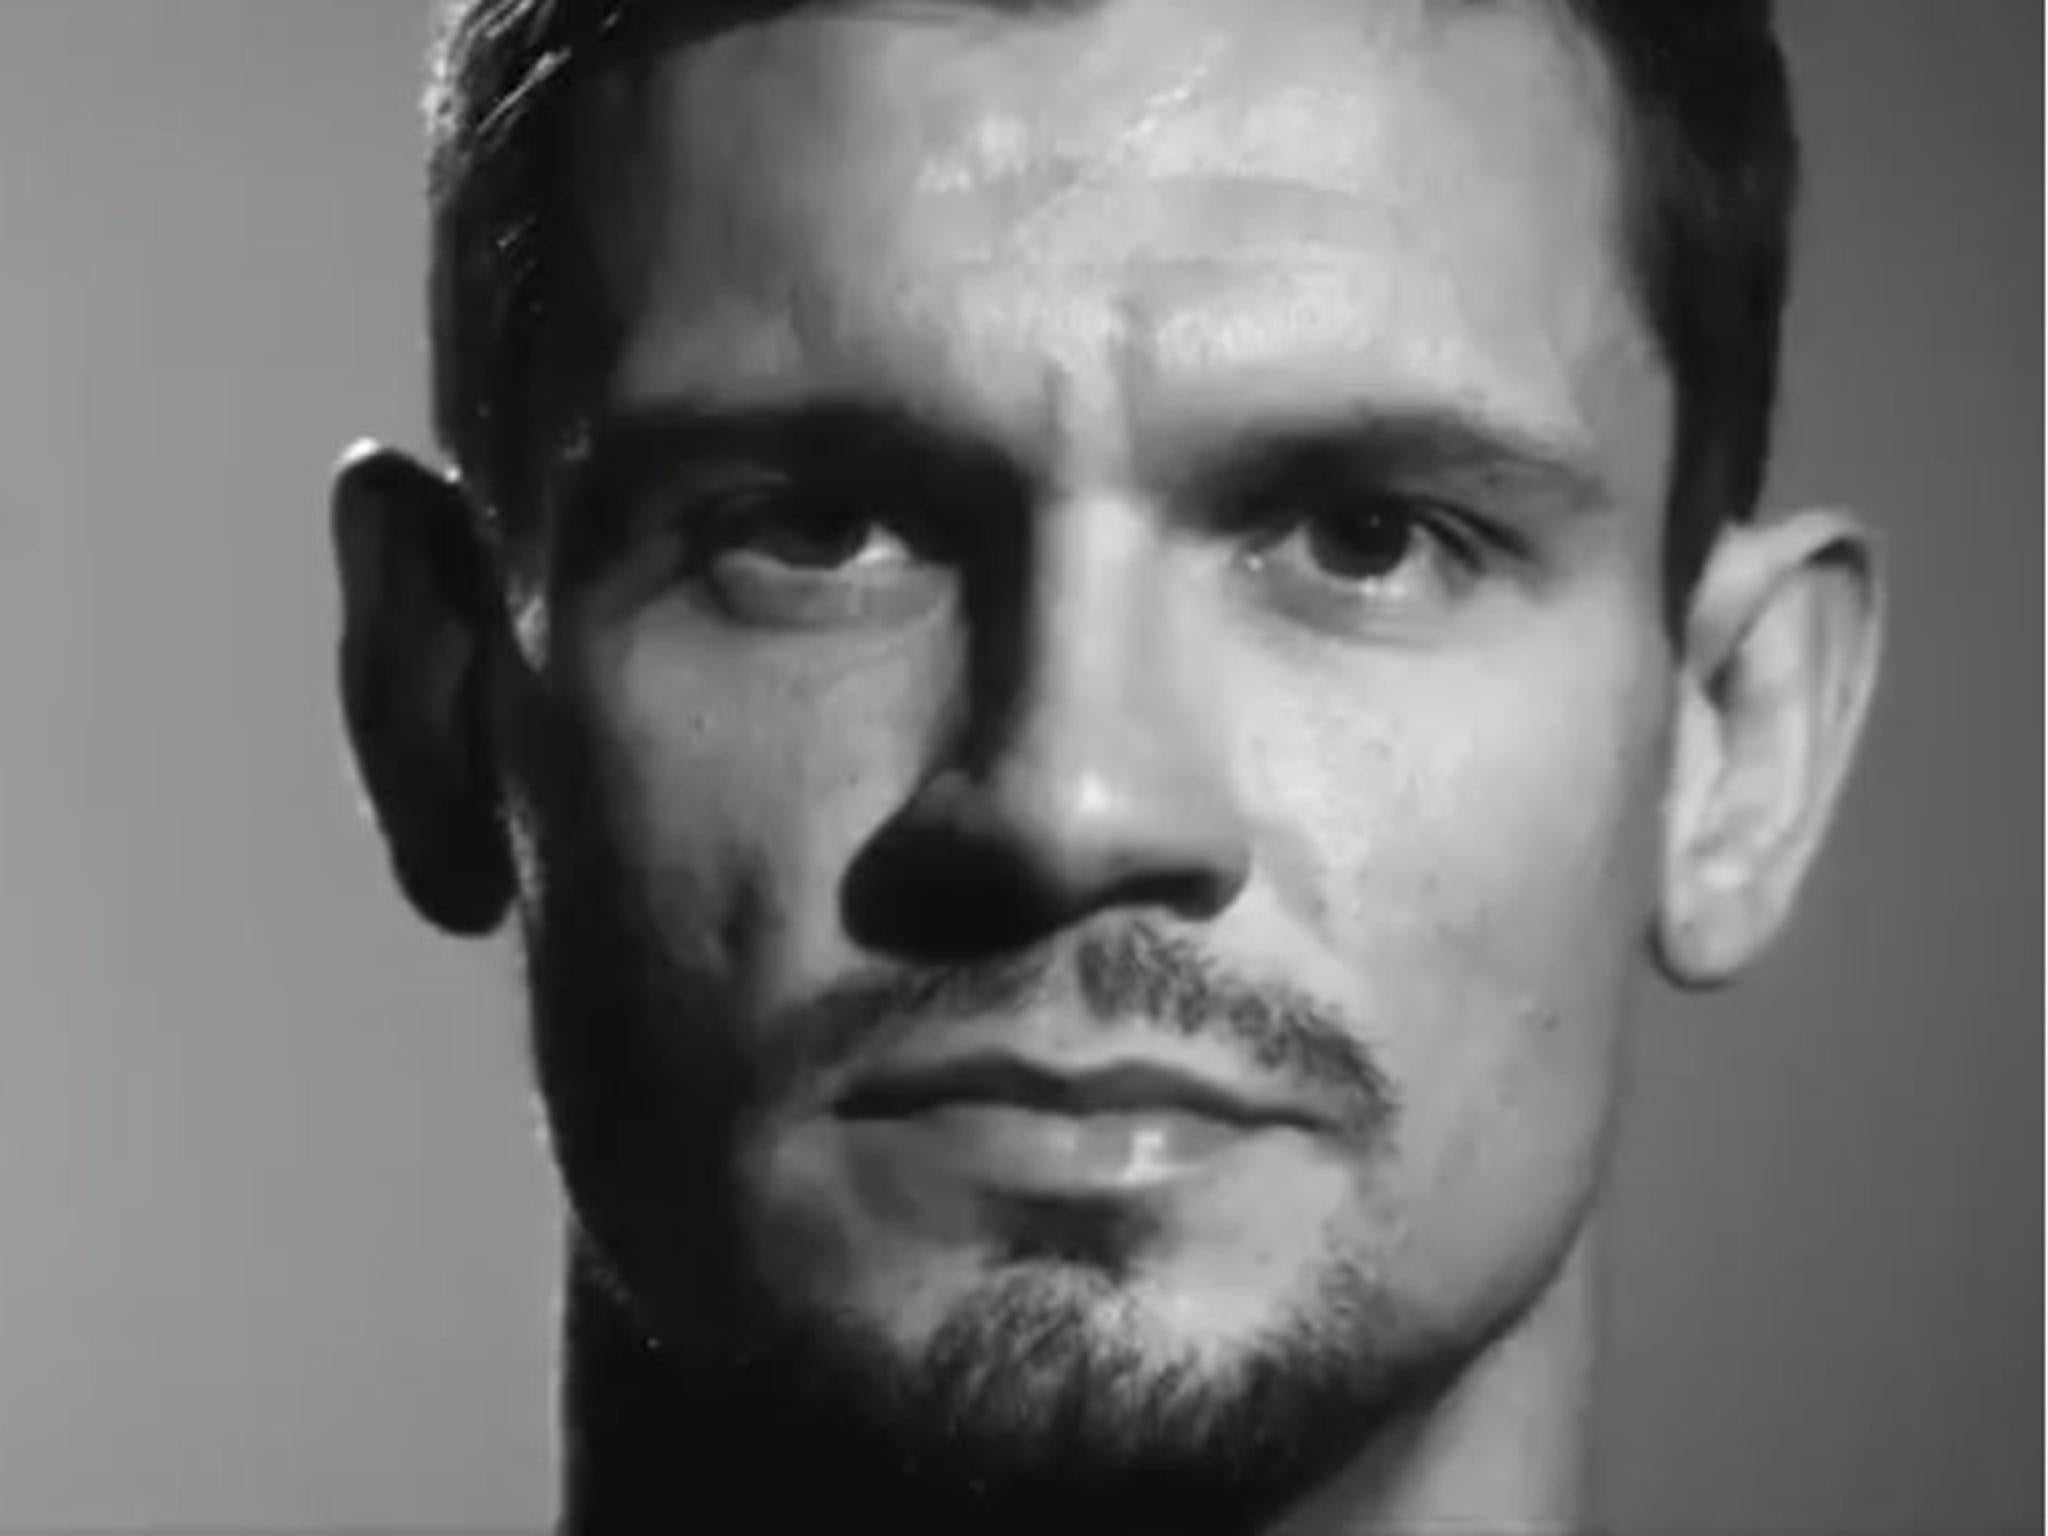 Lovren shared his story despite warnings from his mother not to